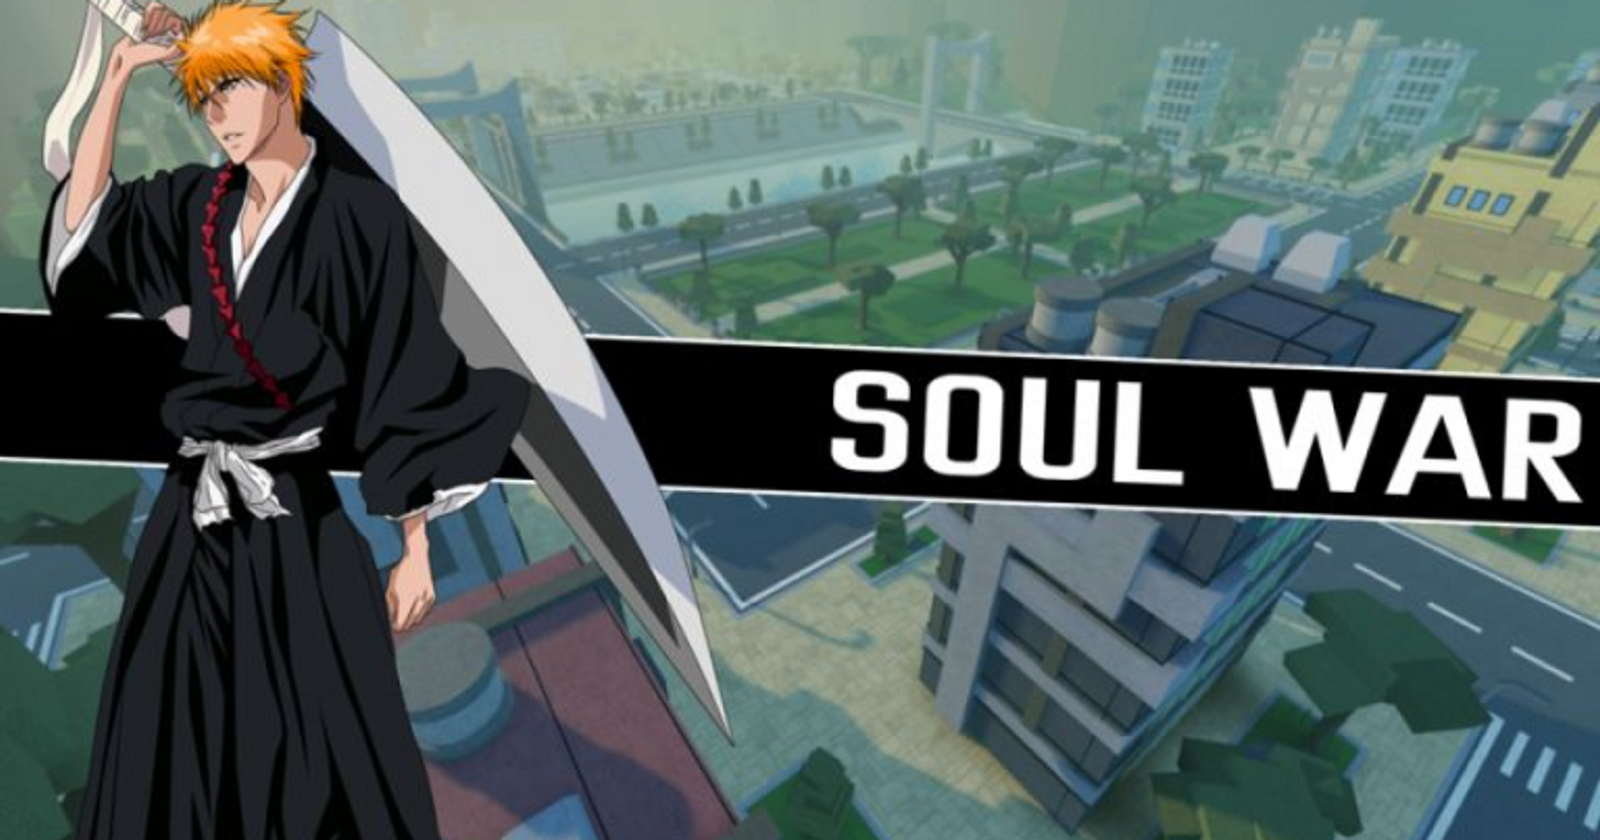 How To Type In Codes in Soul War (UPDATE 1) 2 NEW CODES! 